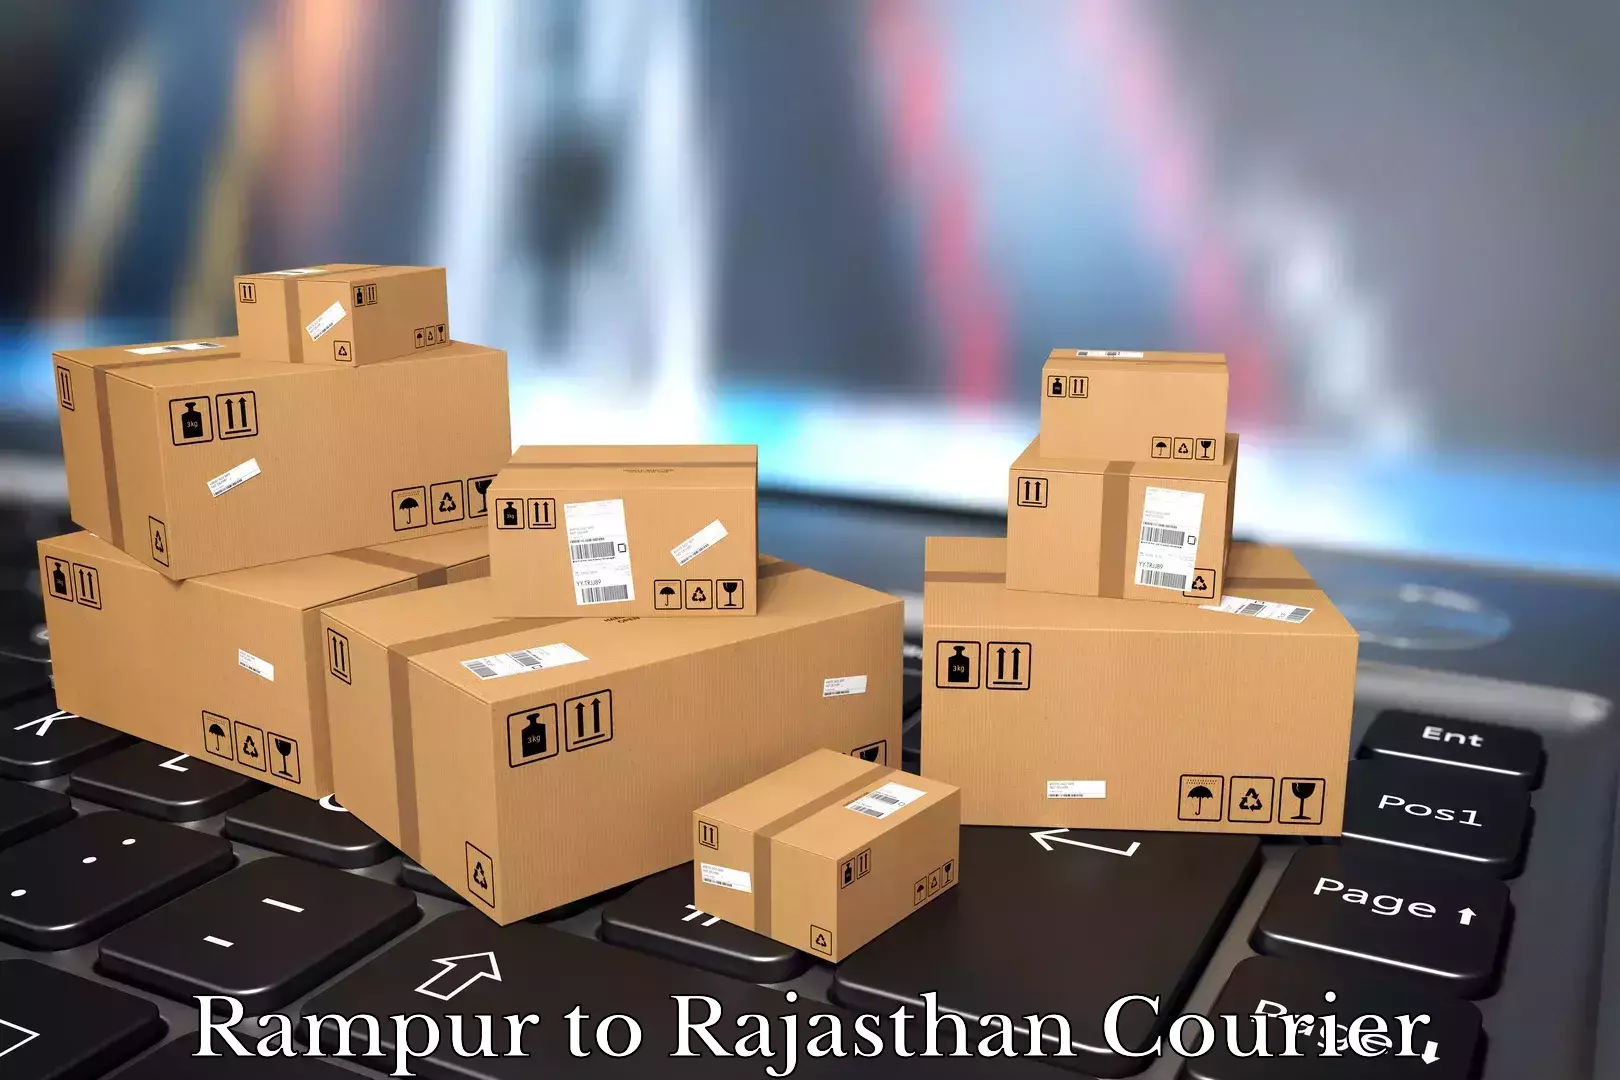 Professional furniture movers Rampur to Chaumahla